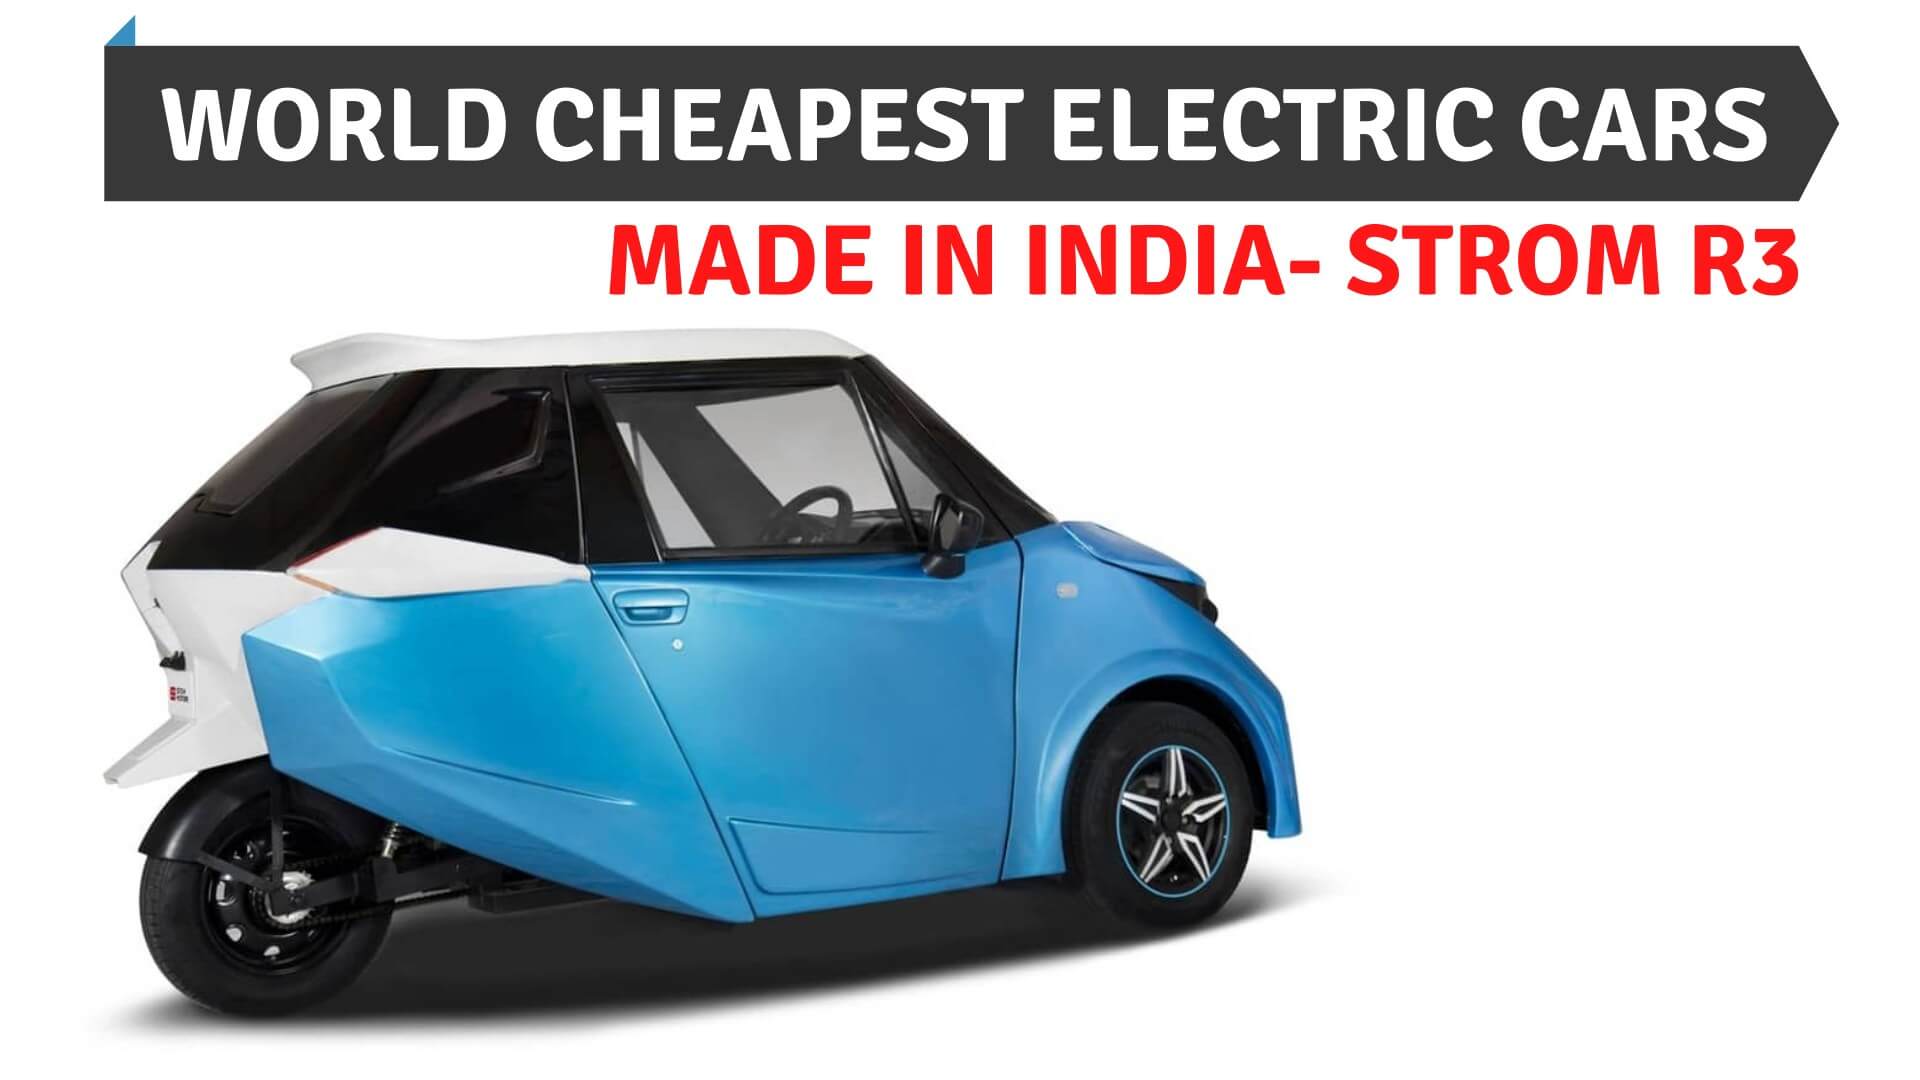 https://e-vehicleinfo.com/world-cheapest-made-in-india-electric-cars-strom-r3/